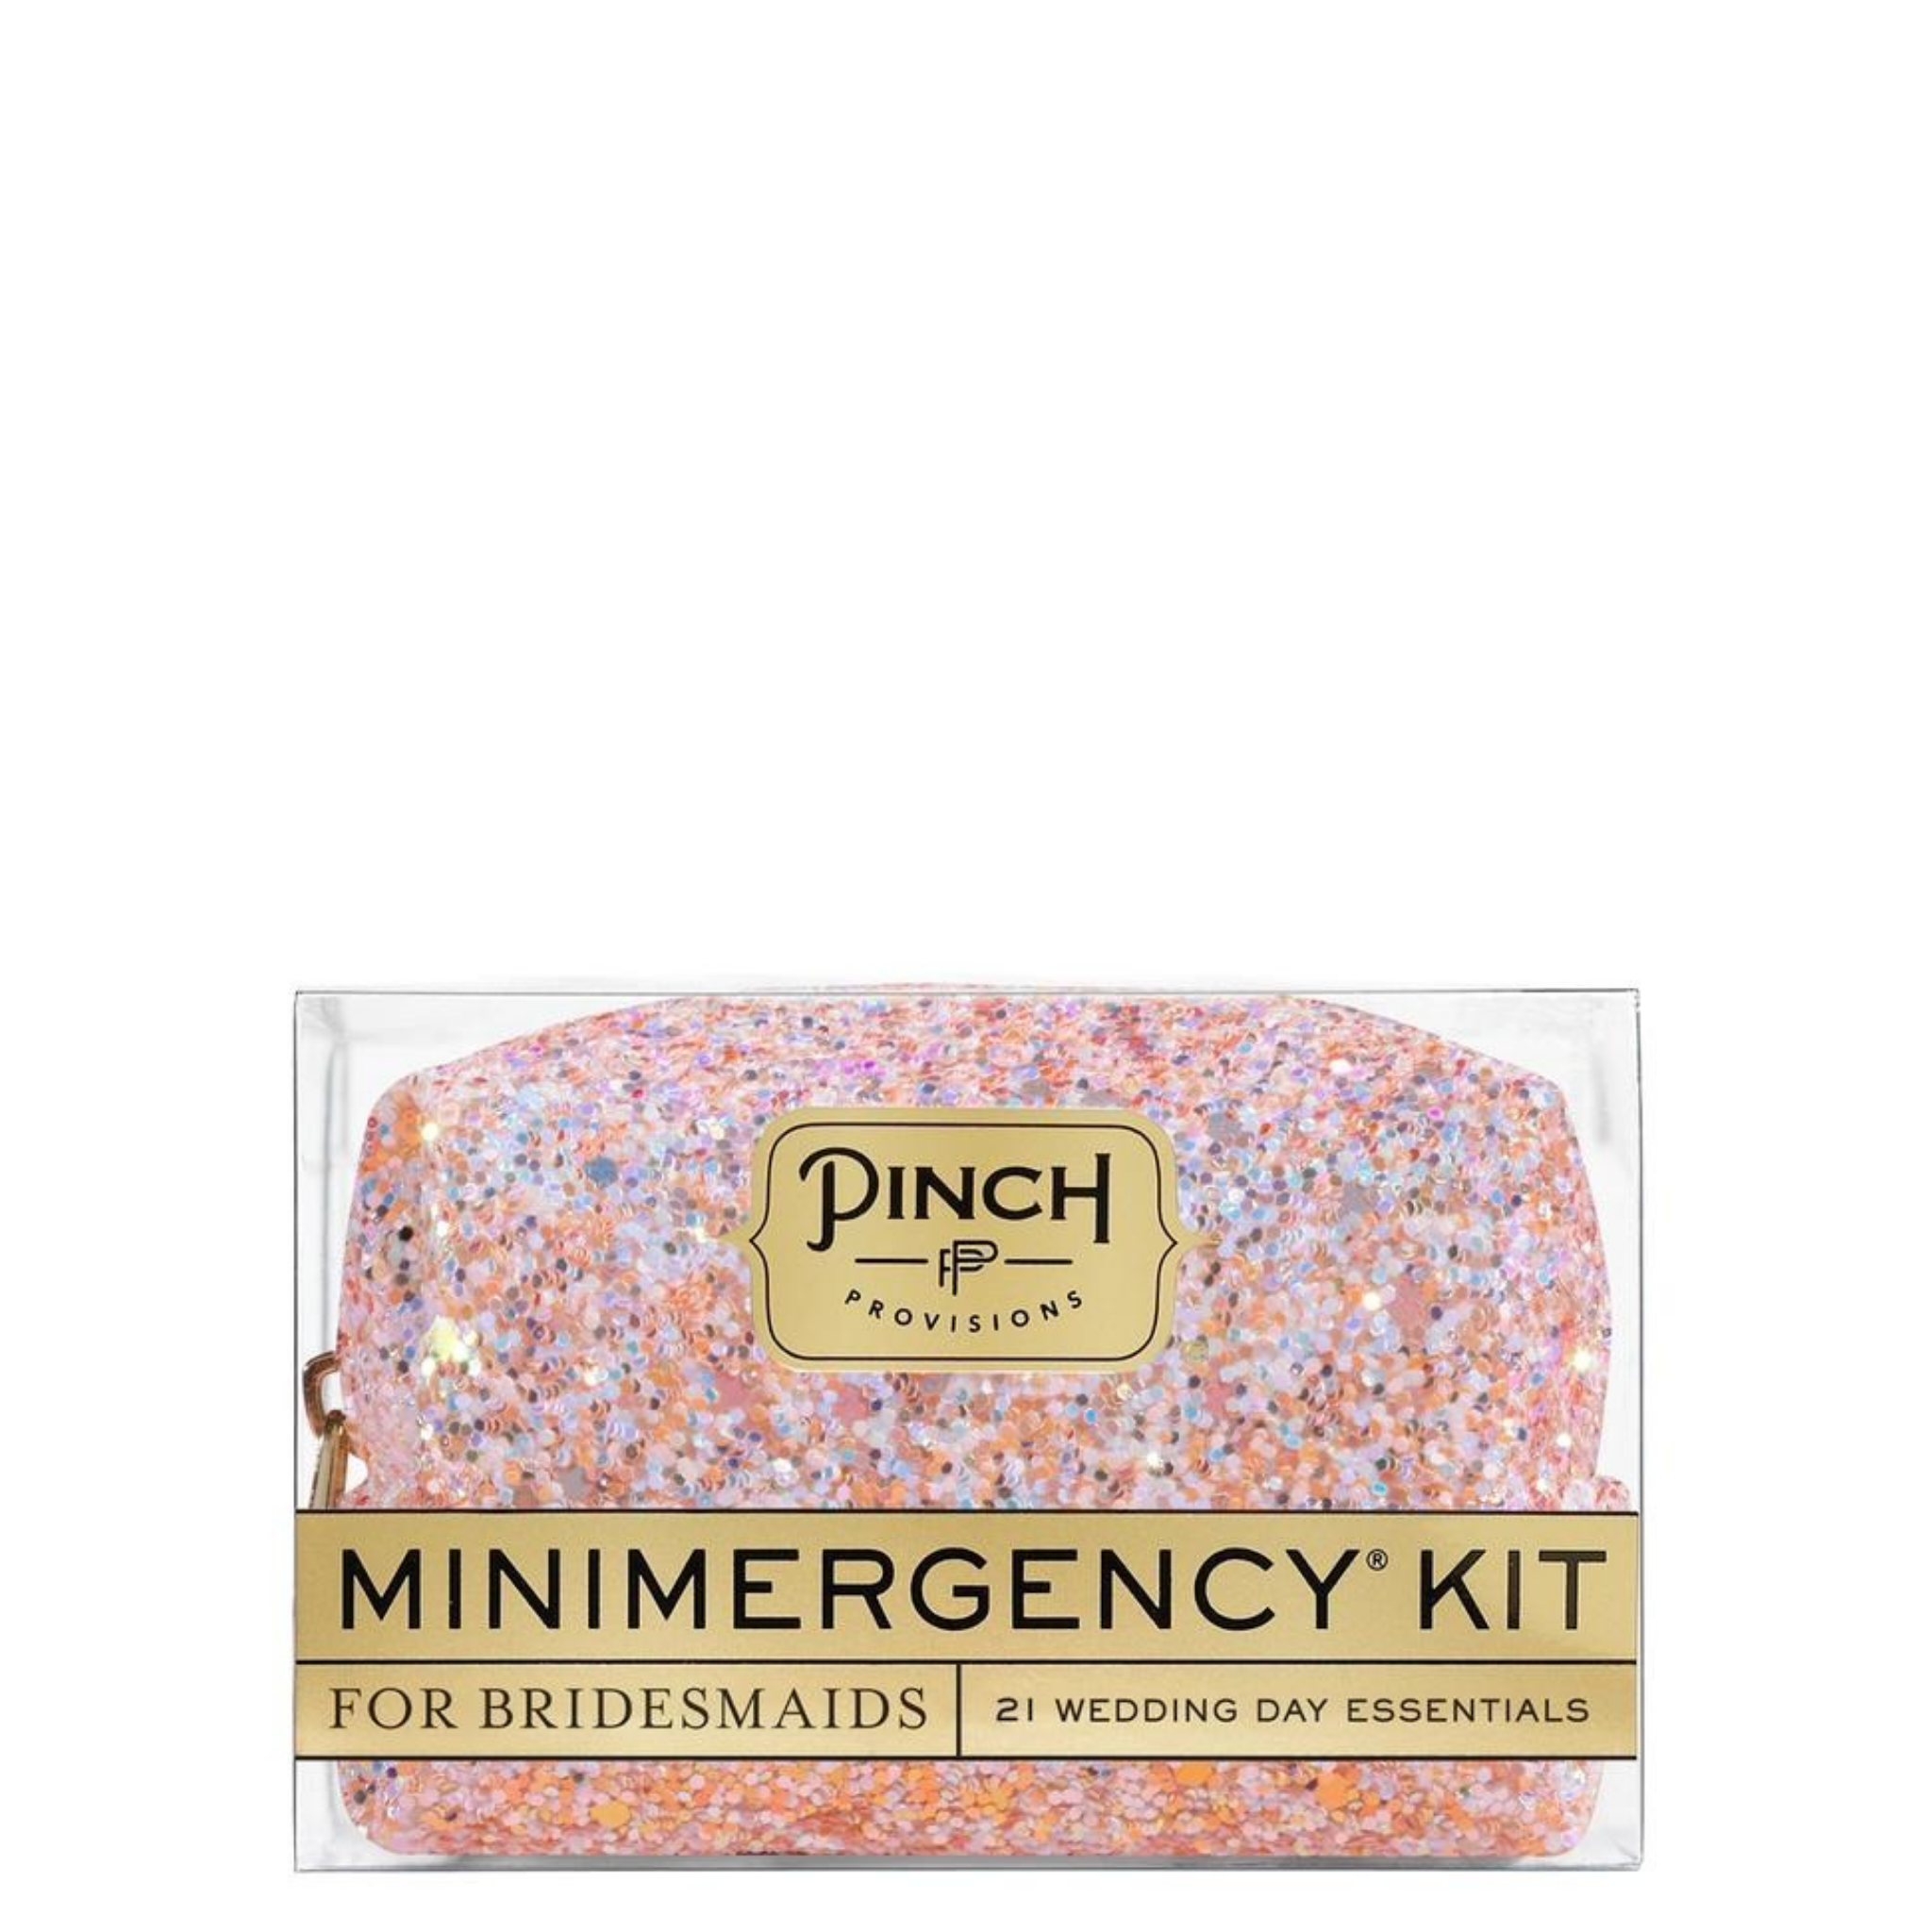 Pinch Provisions Minimergency Kit for Bridesmaides